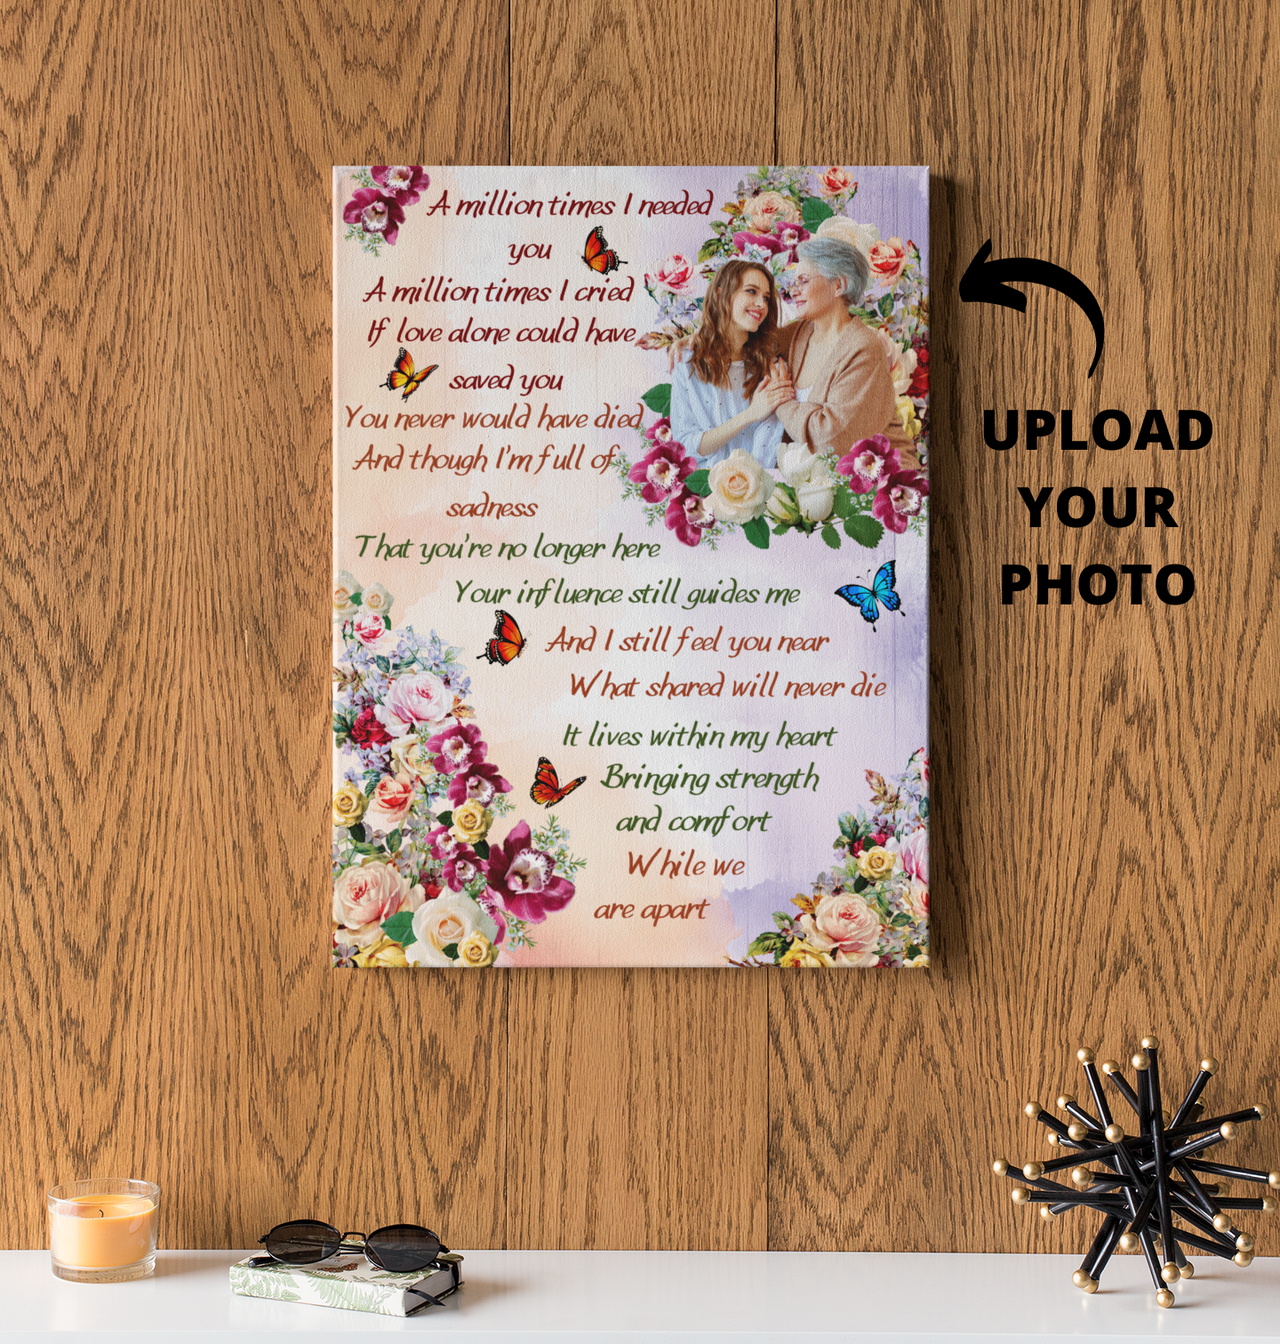 Personalized memorial canvas with a beautiful poem, designed with flowers and photo of the mother in it